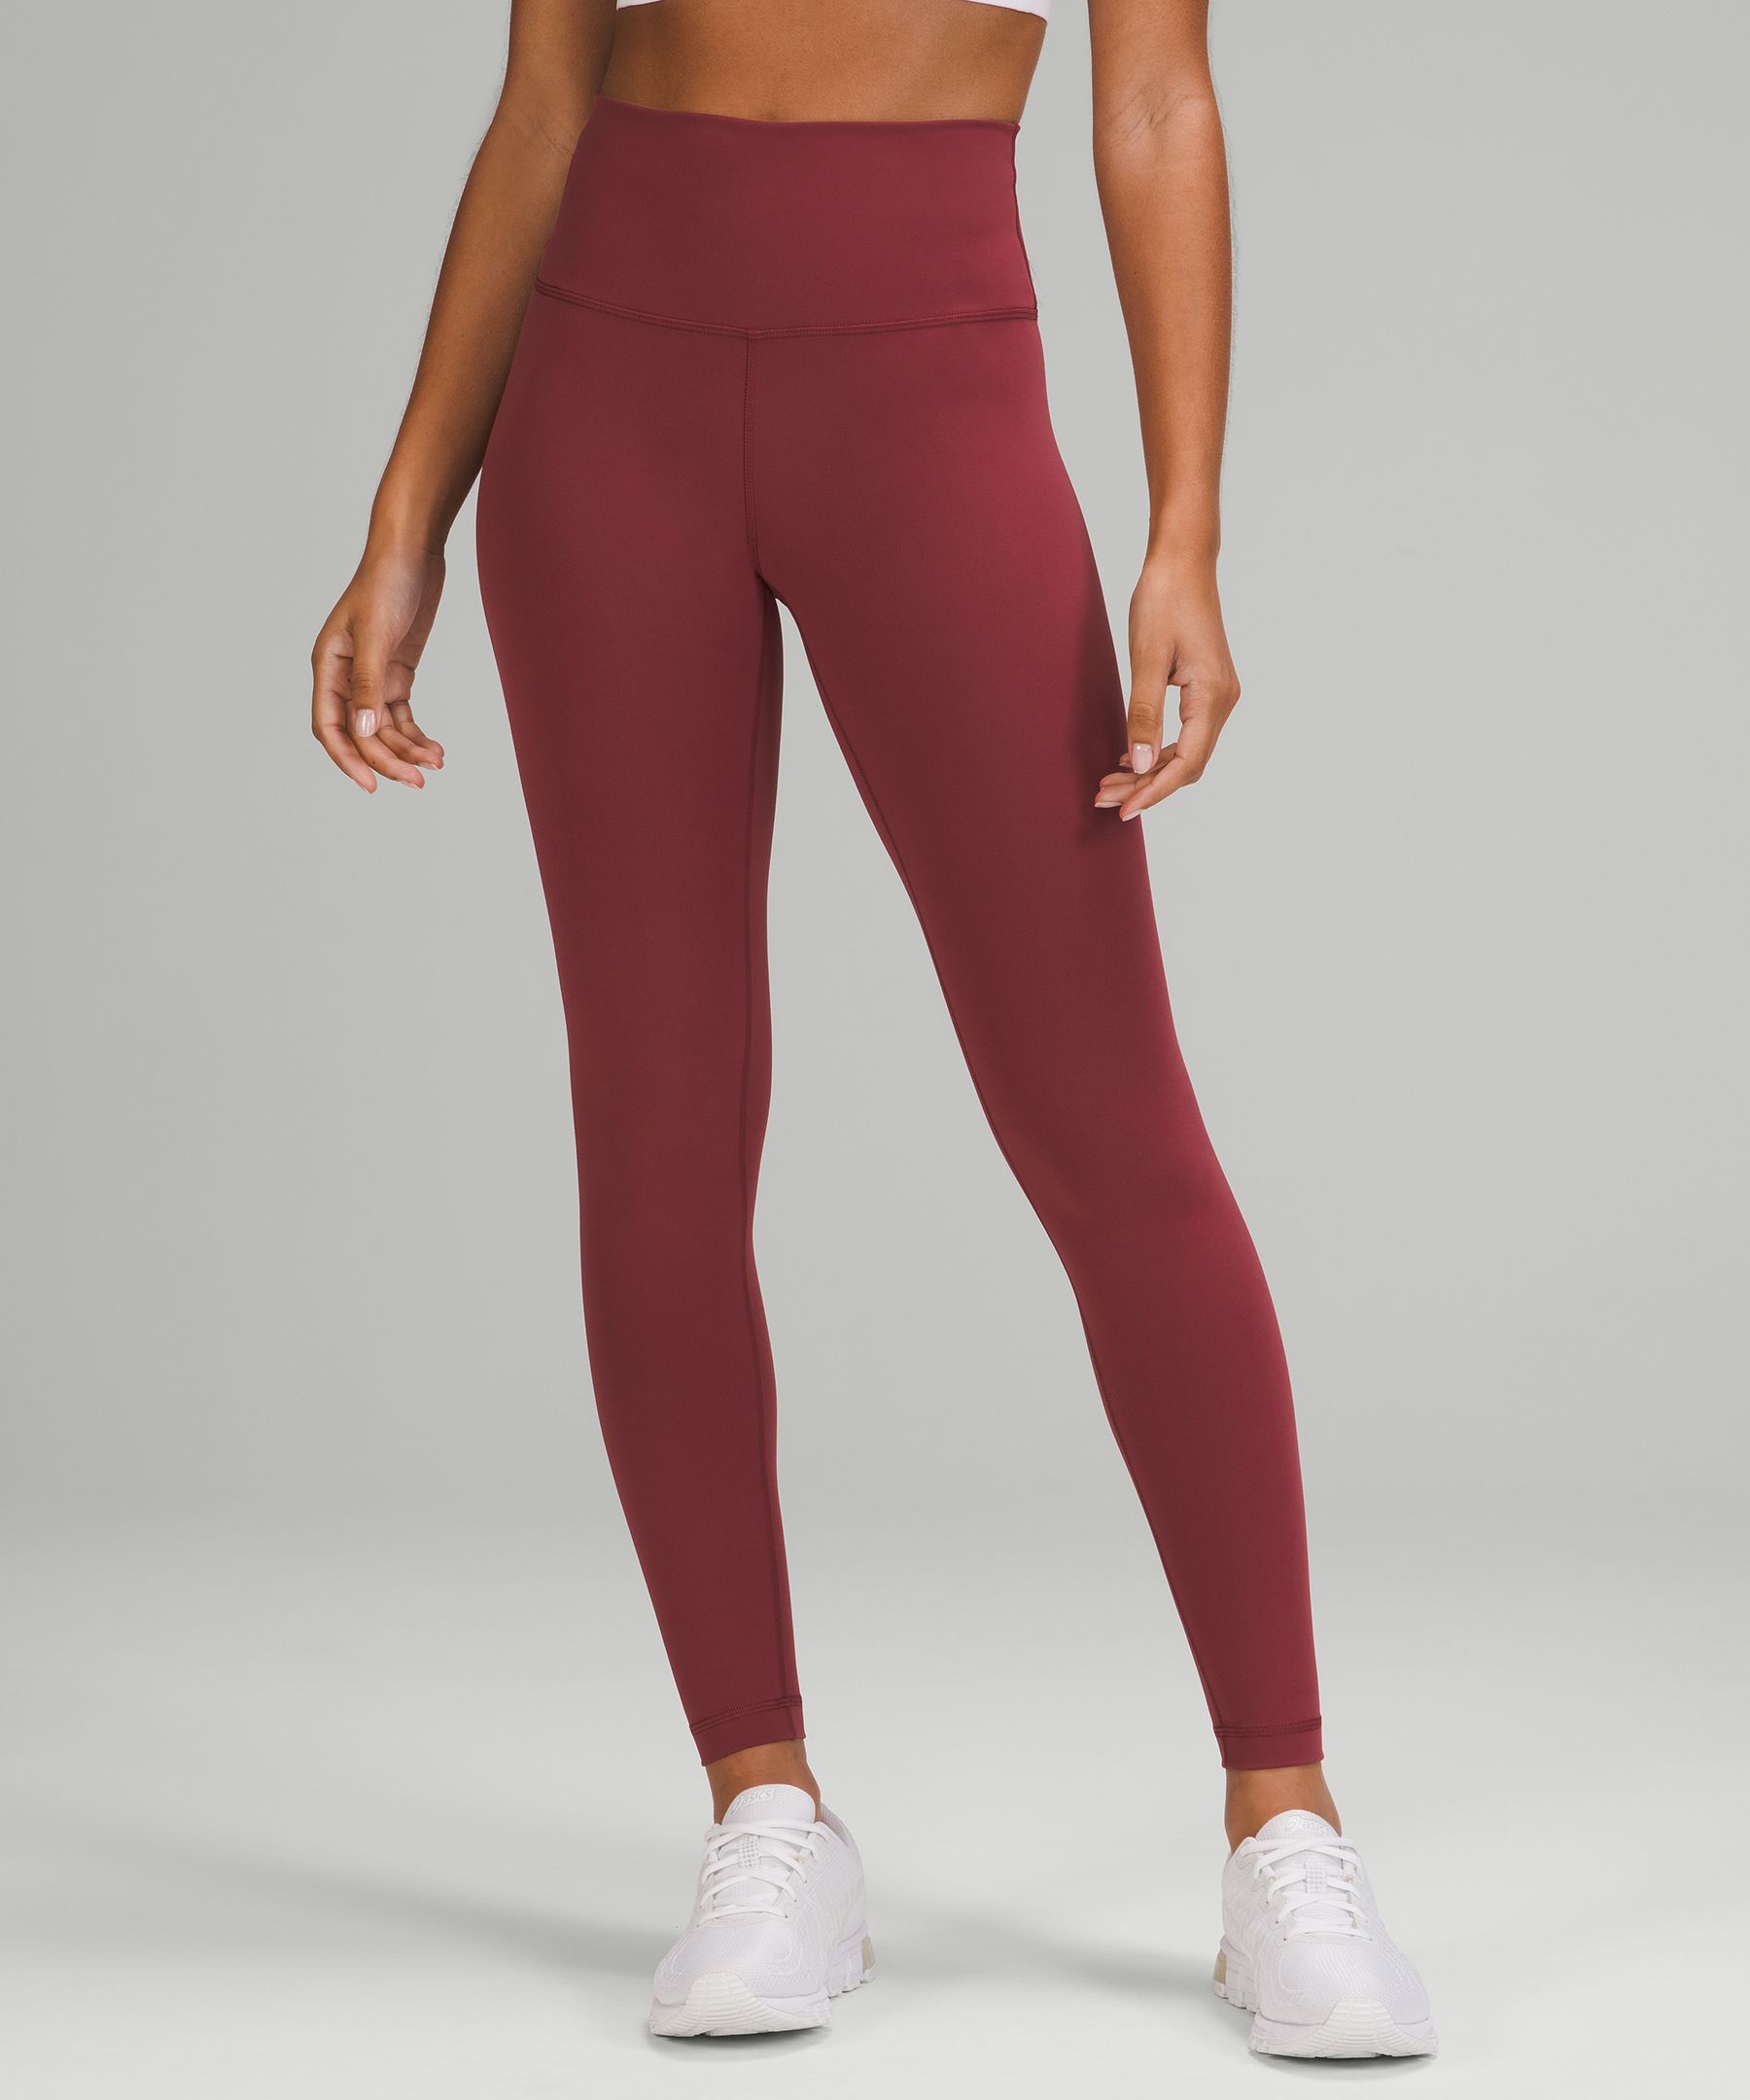 Lululemon Wunder Train High-rise Tights 28" In Mulled Wine